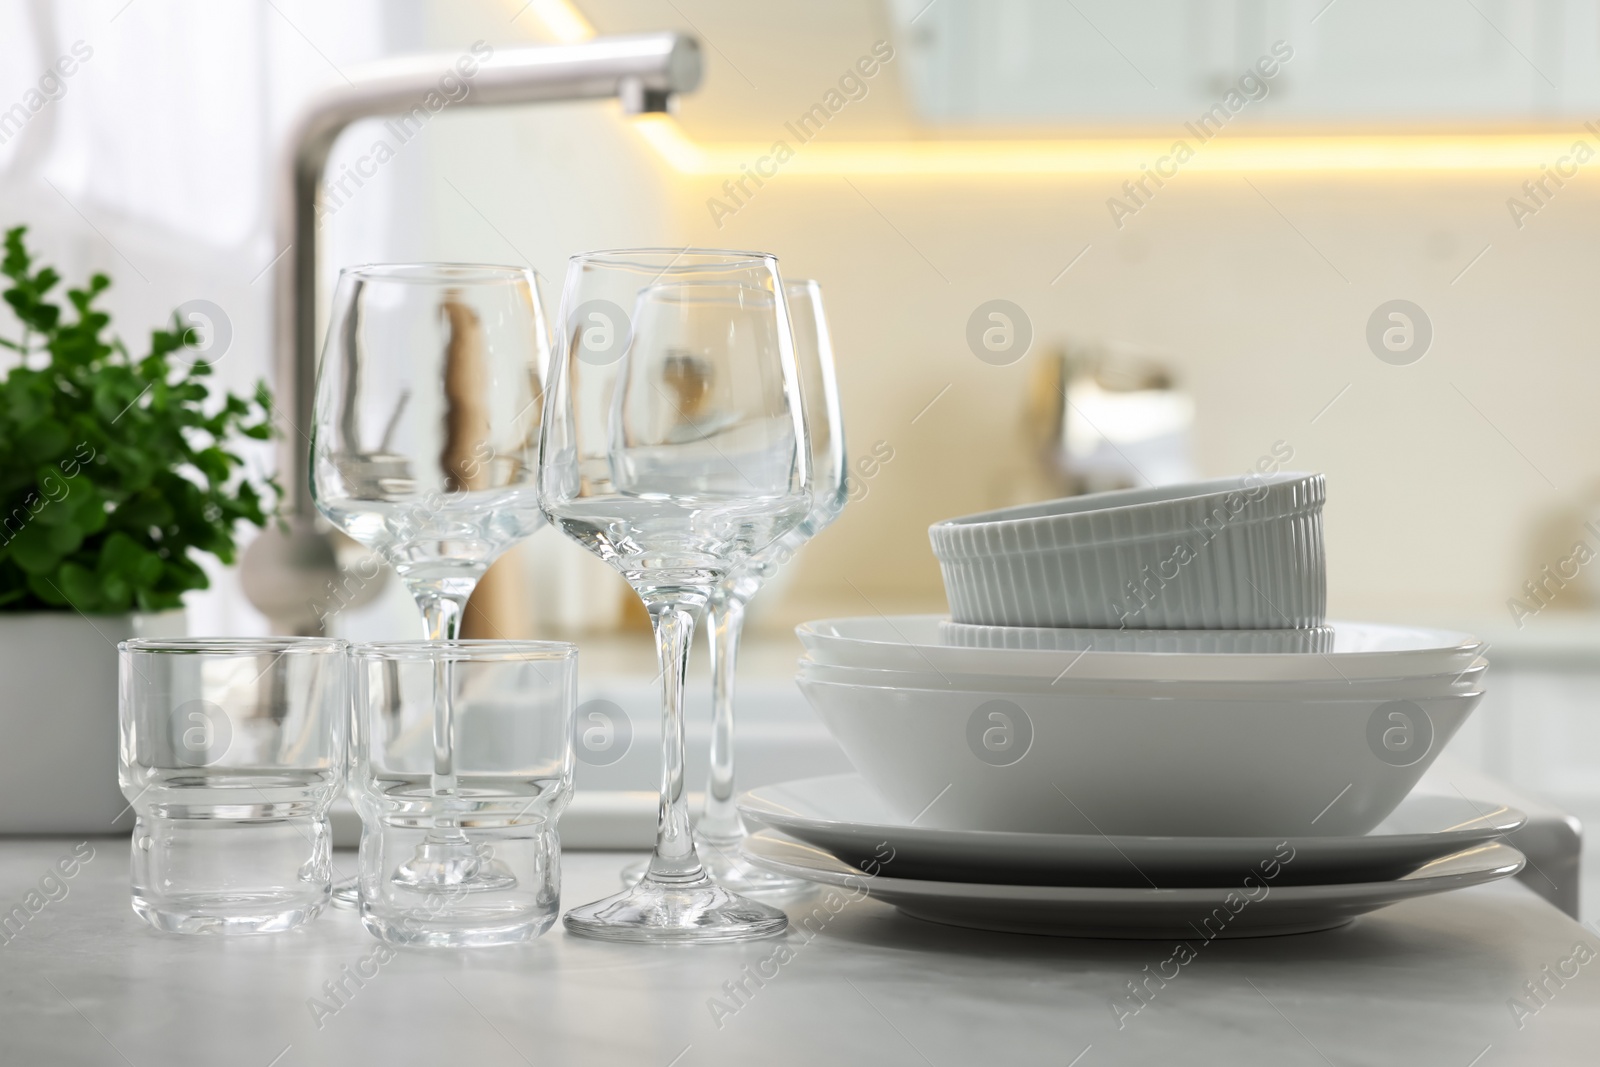 Photo of Different clean dishware and glasses on countertop in kitchen